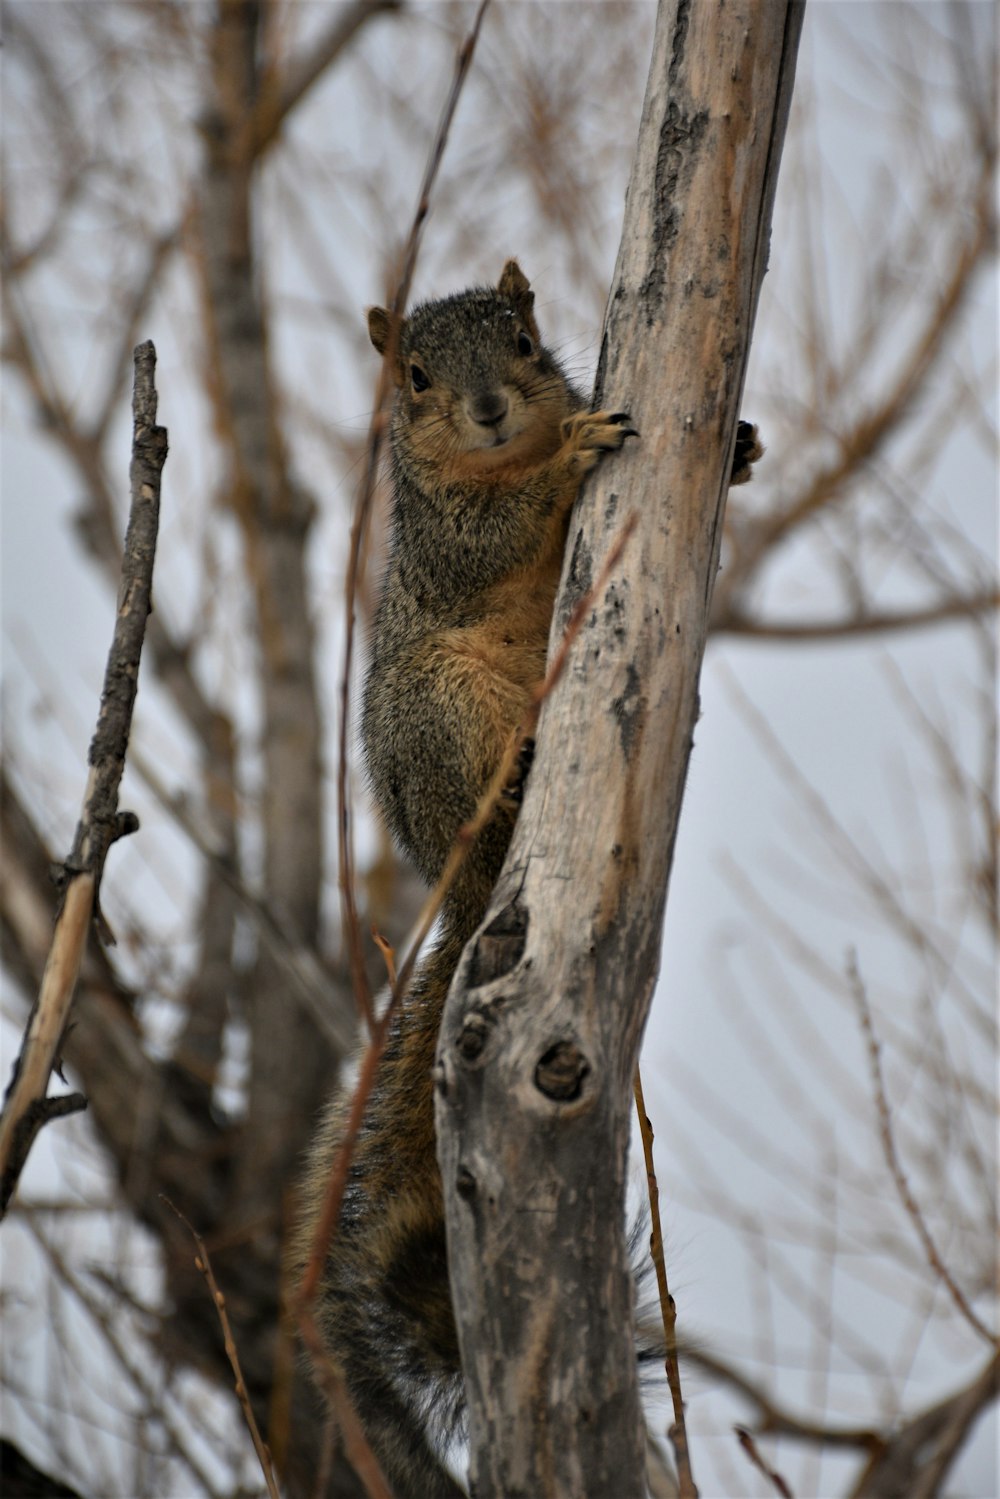 a squirrel is climbing up a tree branch